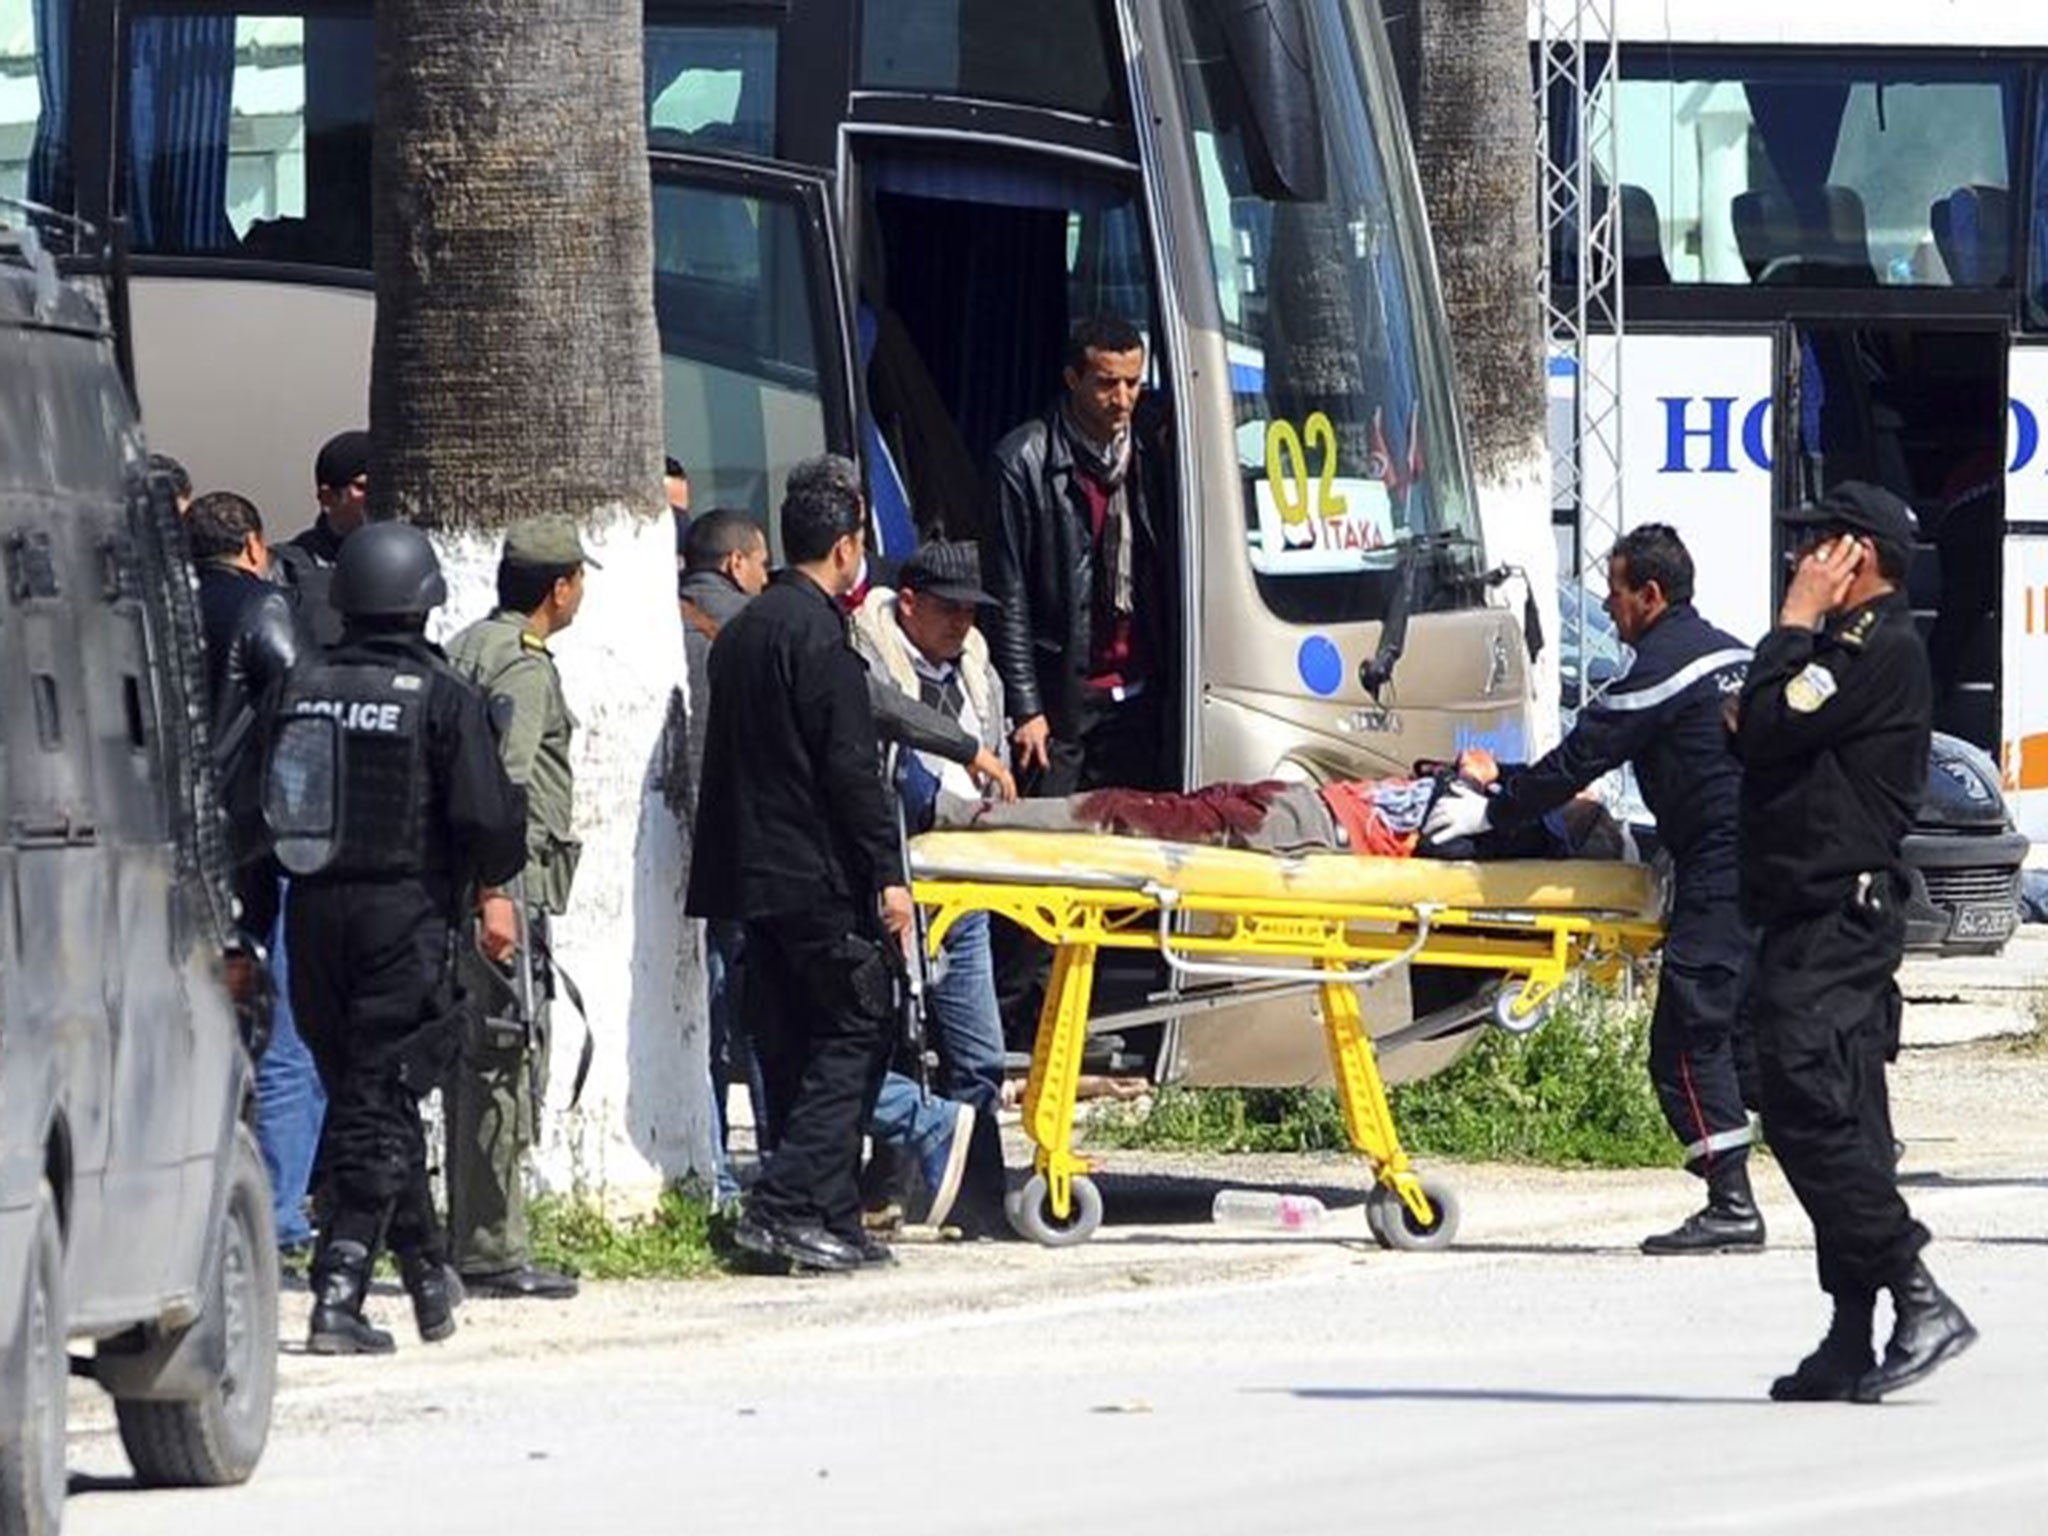 A victim is being evacuated from the Bardo museum are evacuated in Tunis, Wednesday, March 18, 2015 in Tunis,